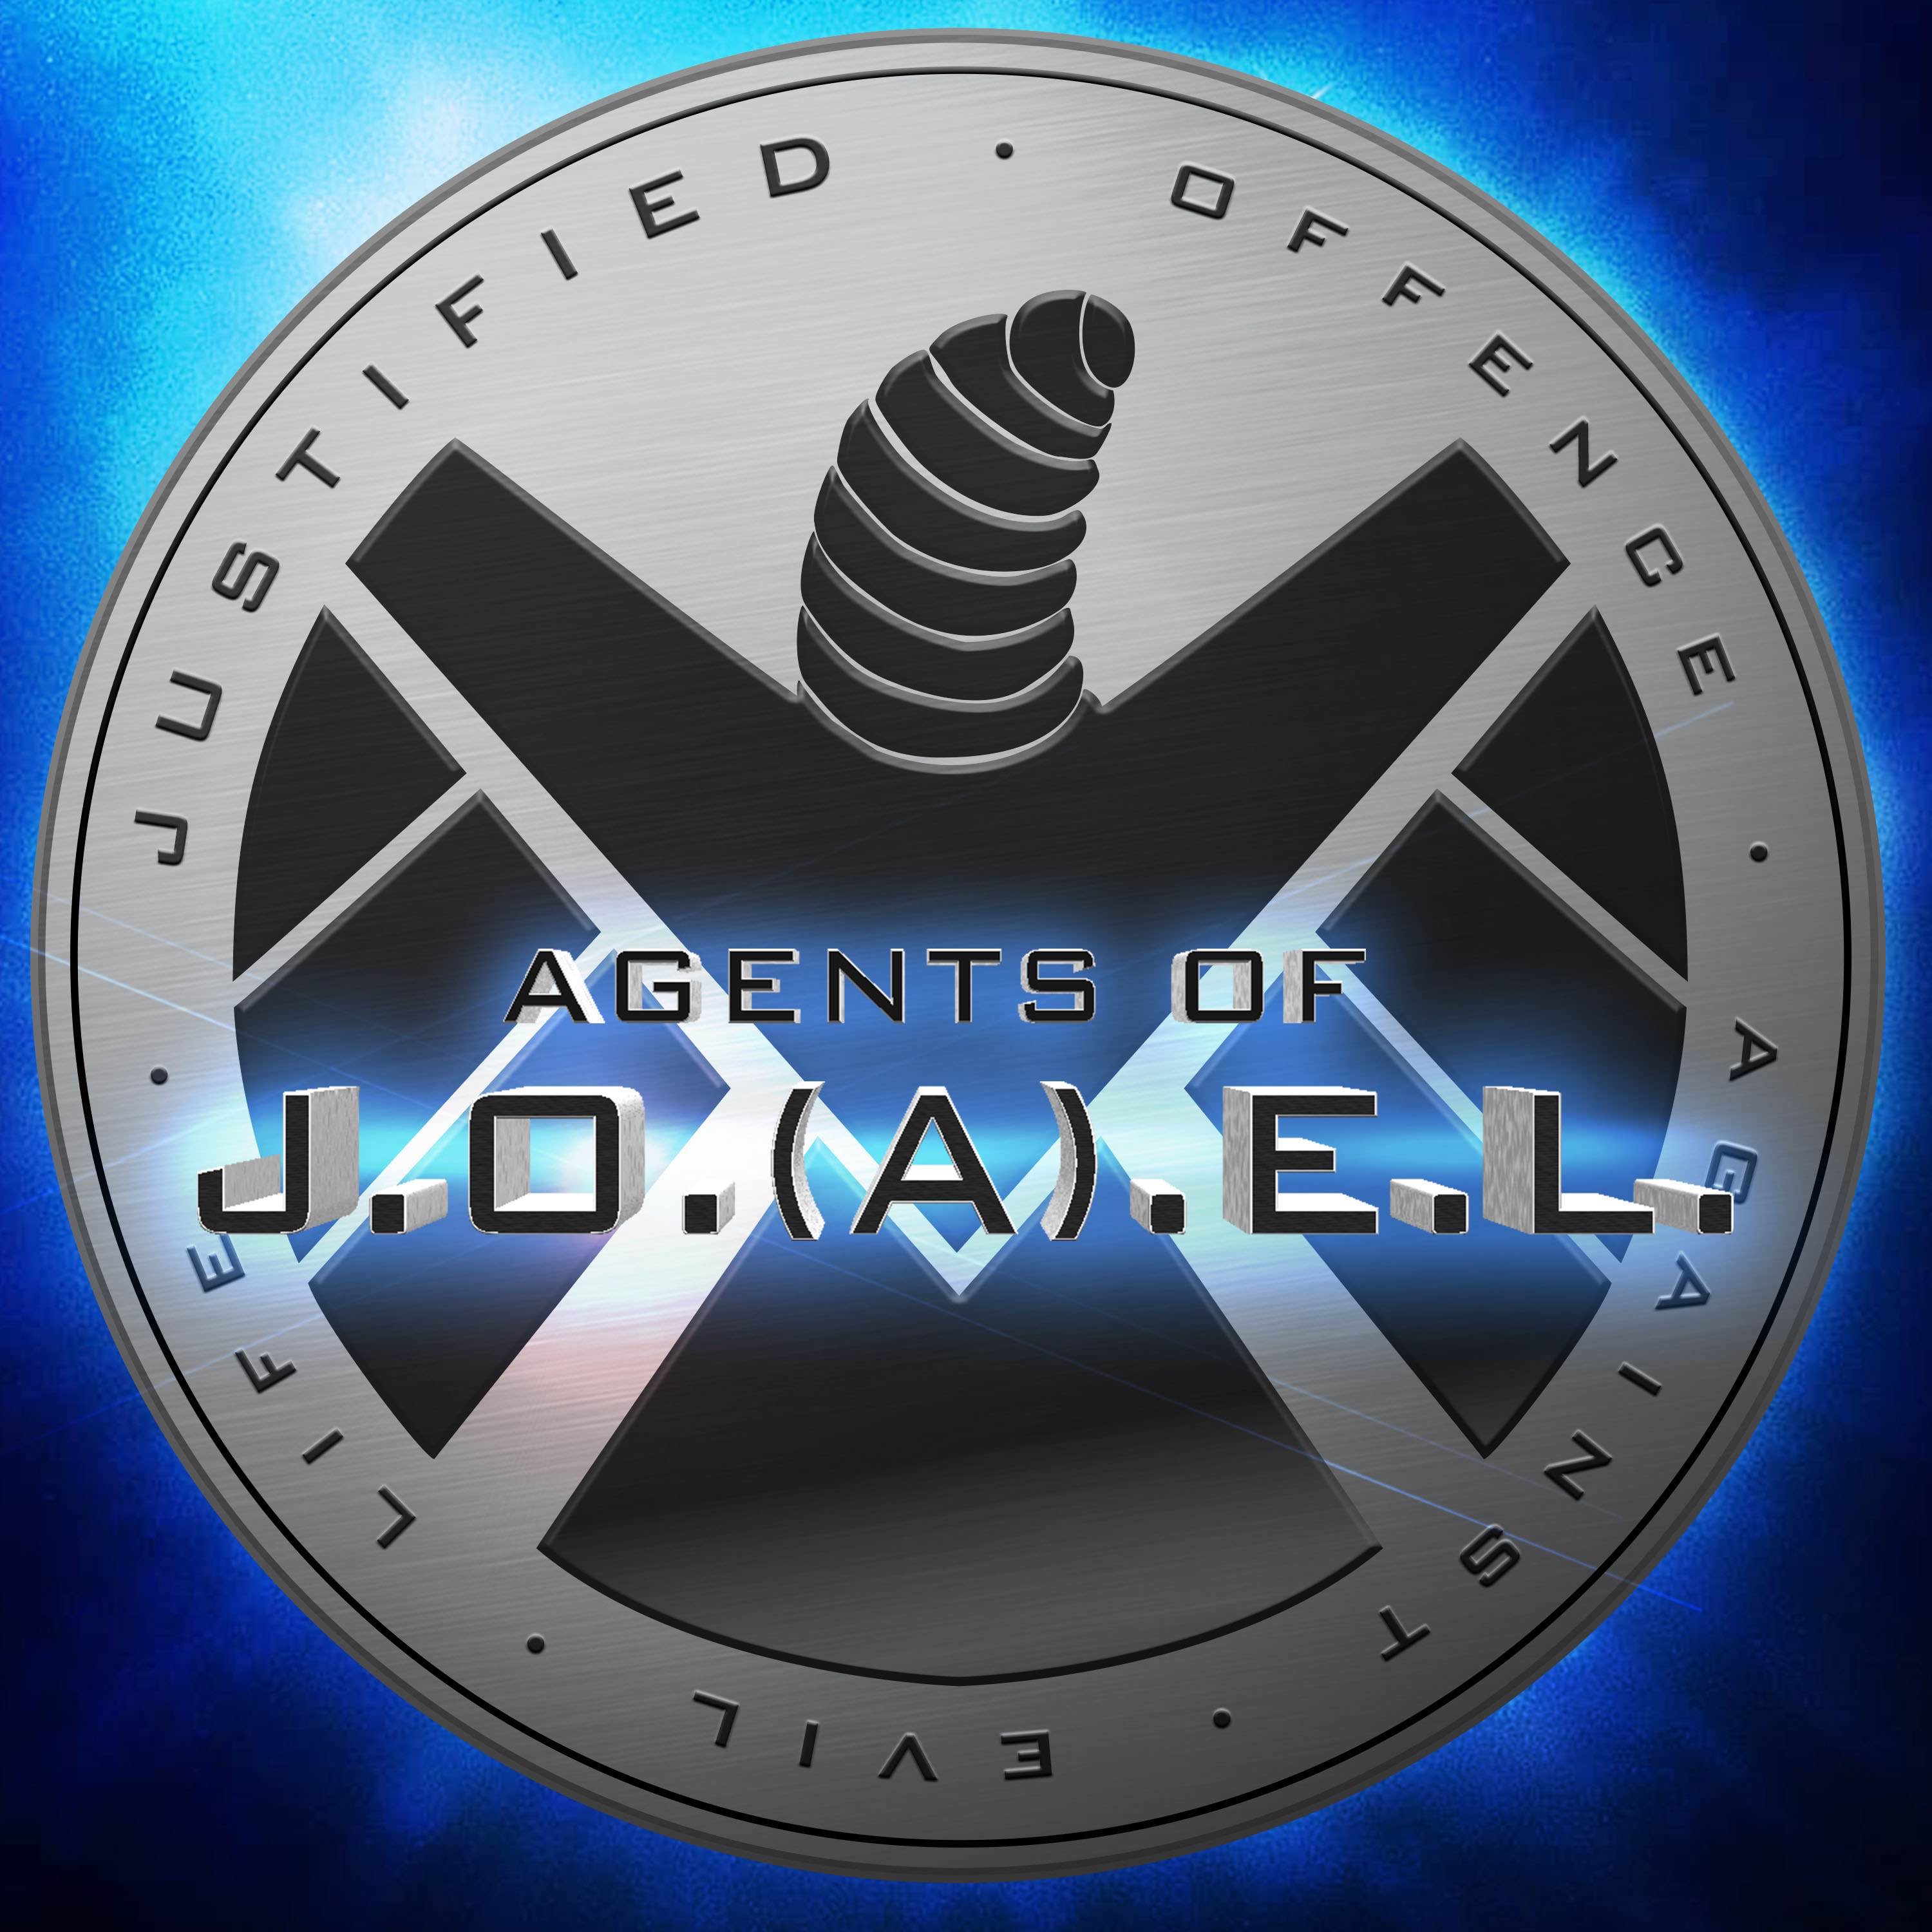 Agents of J.O.(a).E.L. The Christmas Project #1